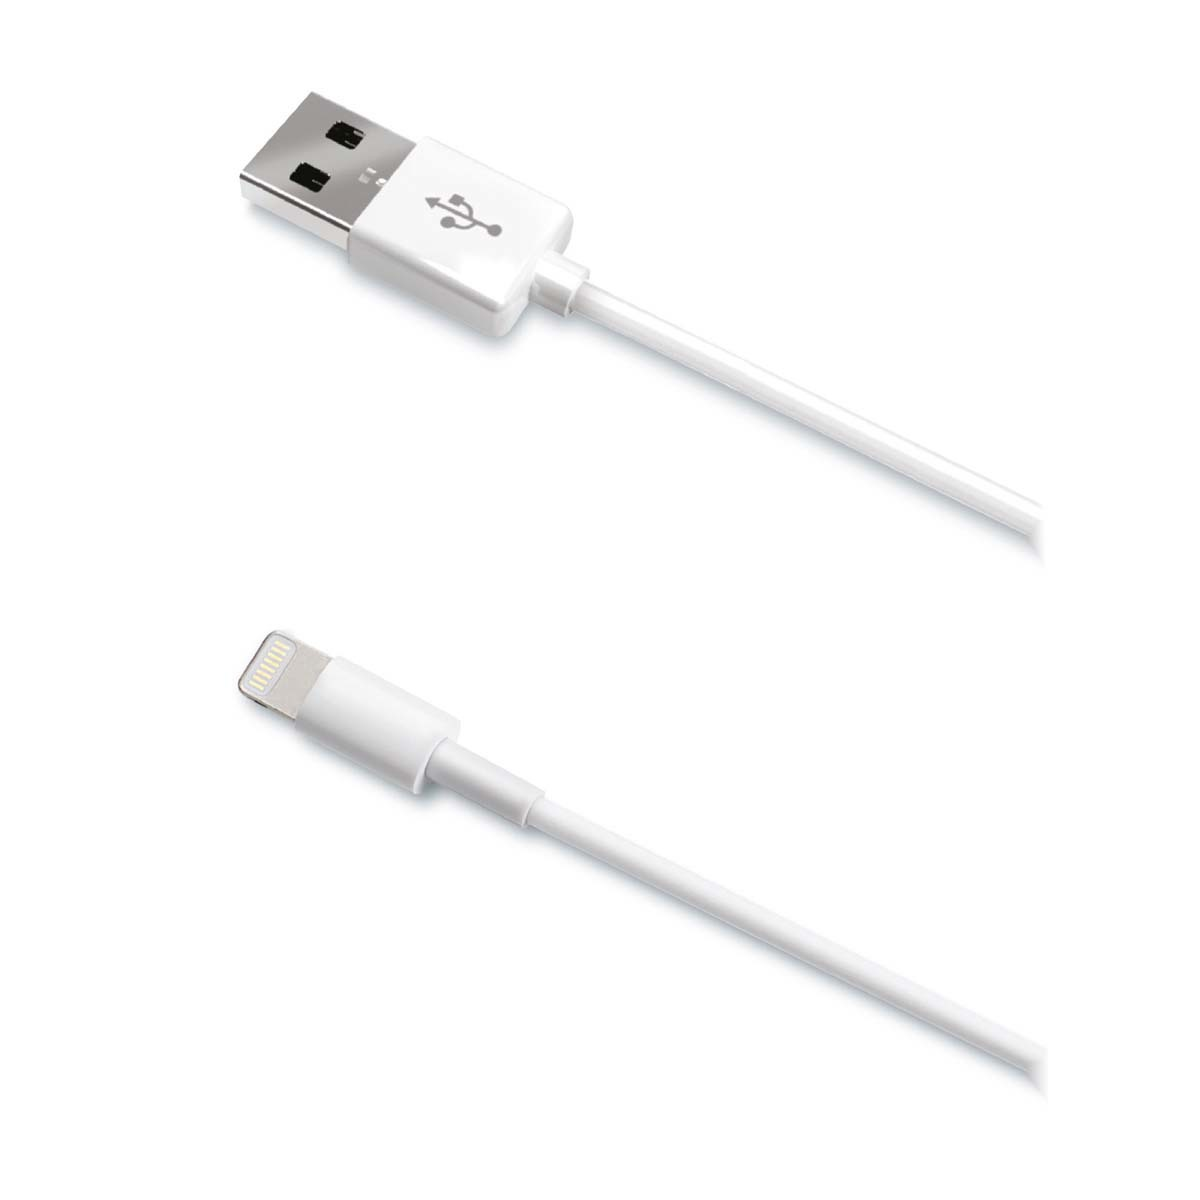 Cable Usblightning Celly celca013 blanco a lightning de tel microusb lighting – compatible con iphone ipad ipod